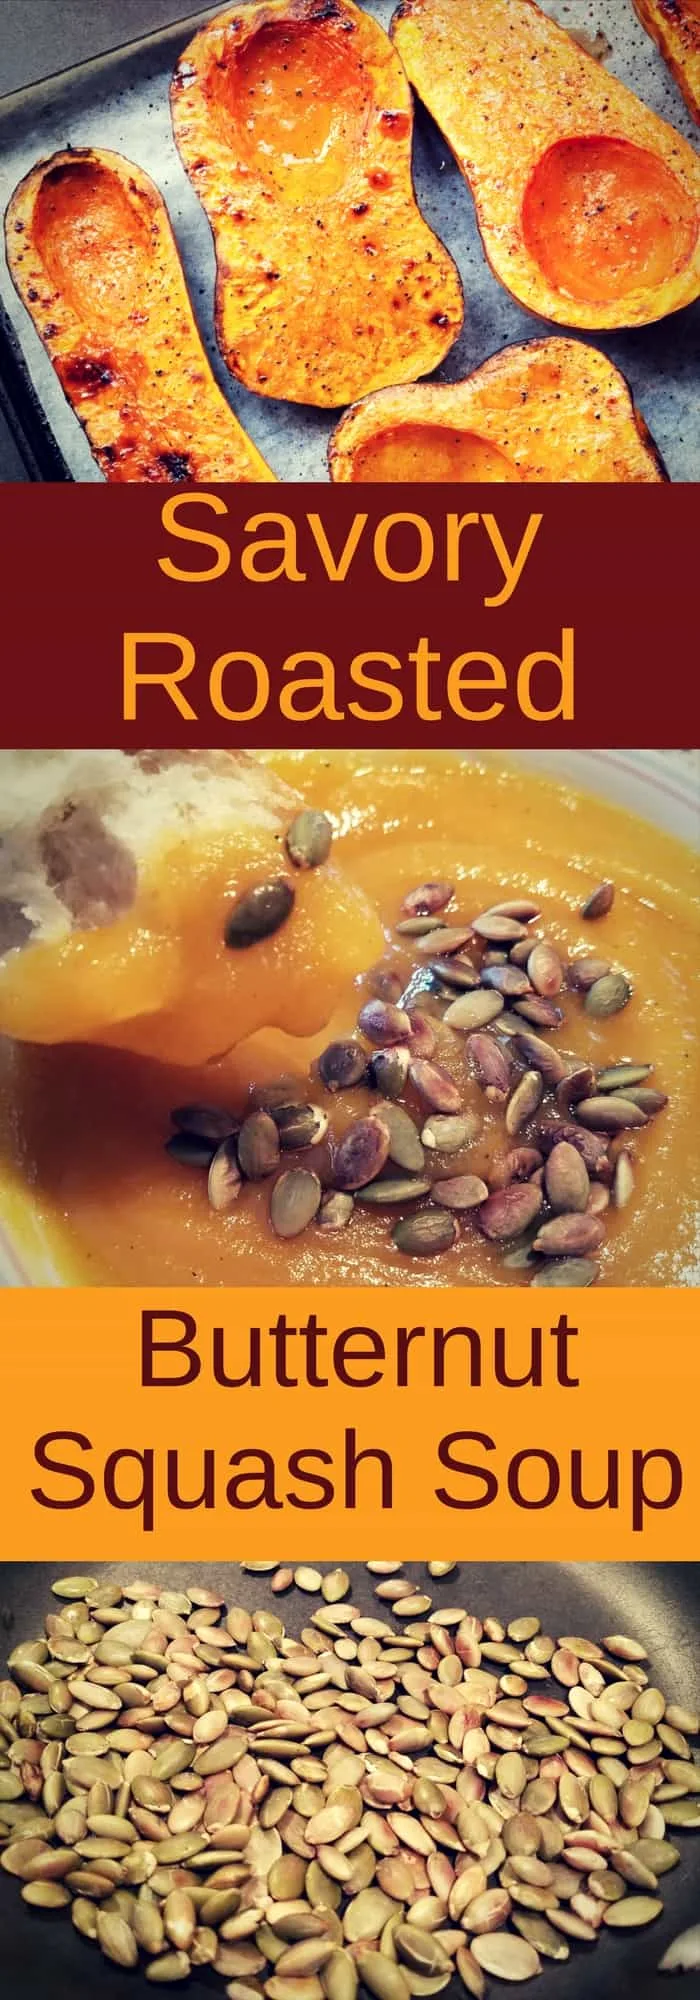 This healthy roasted butternut squash soup is easy to make and DELICIOUS!